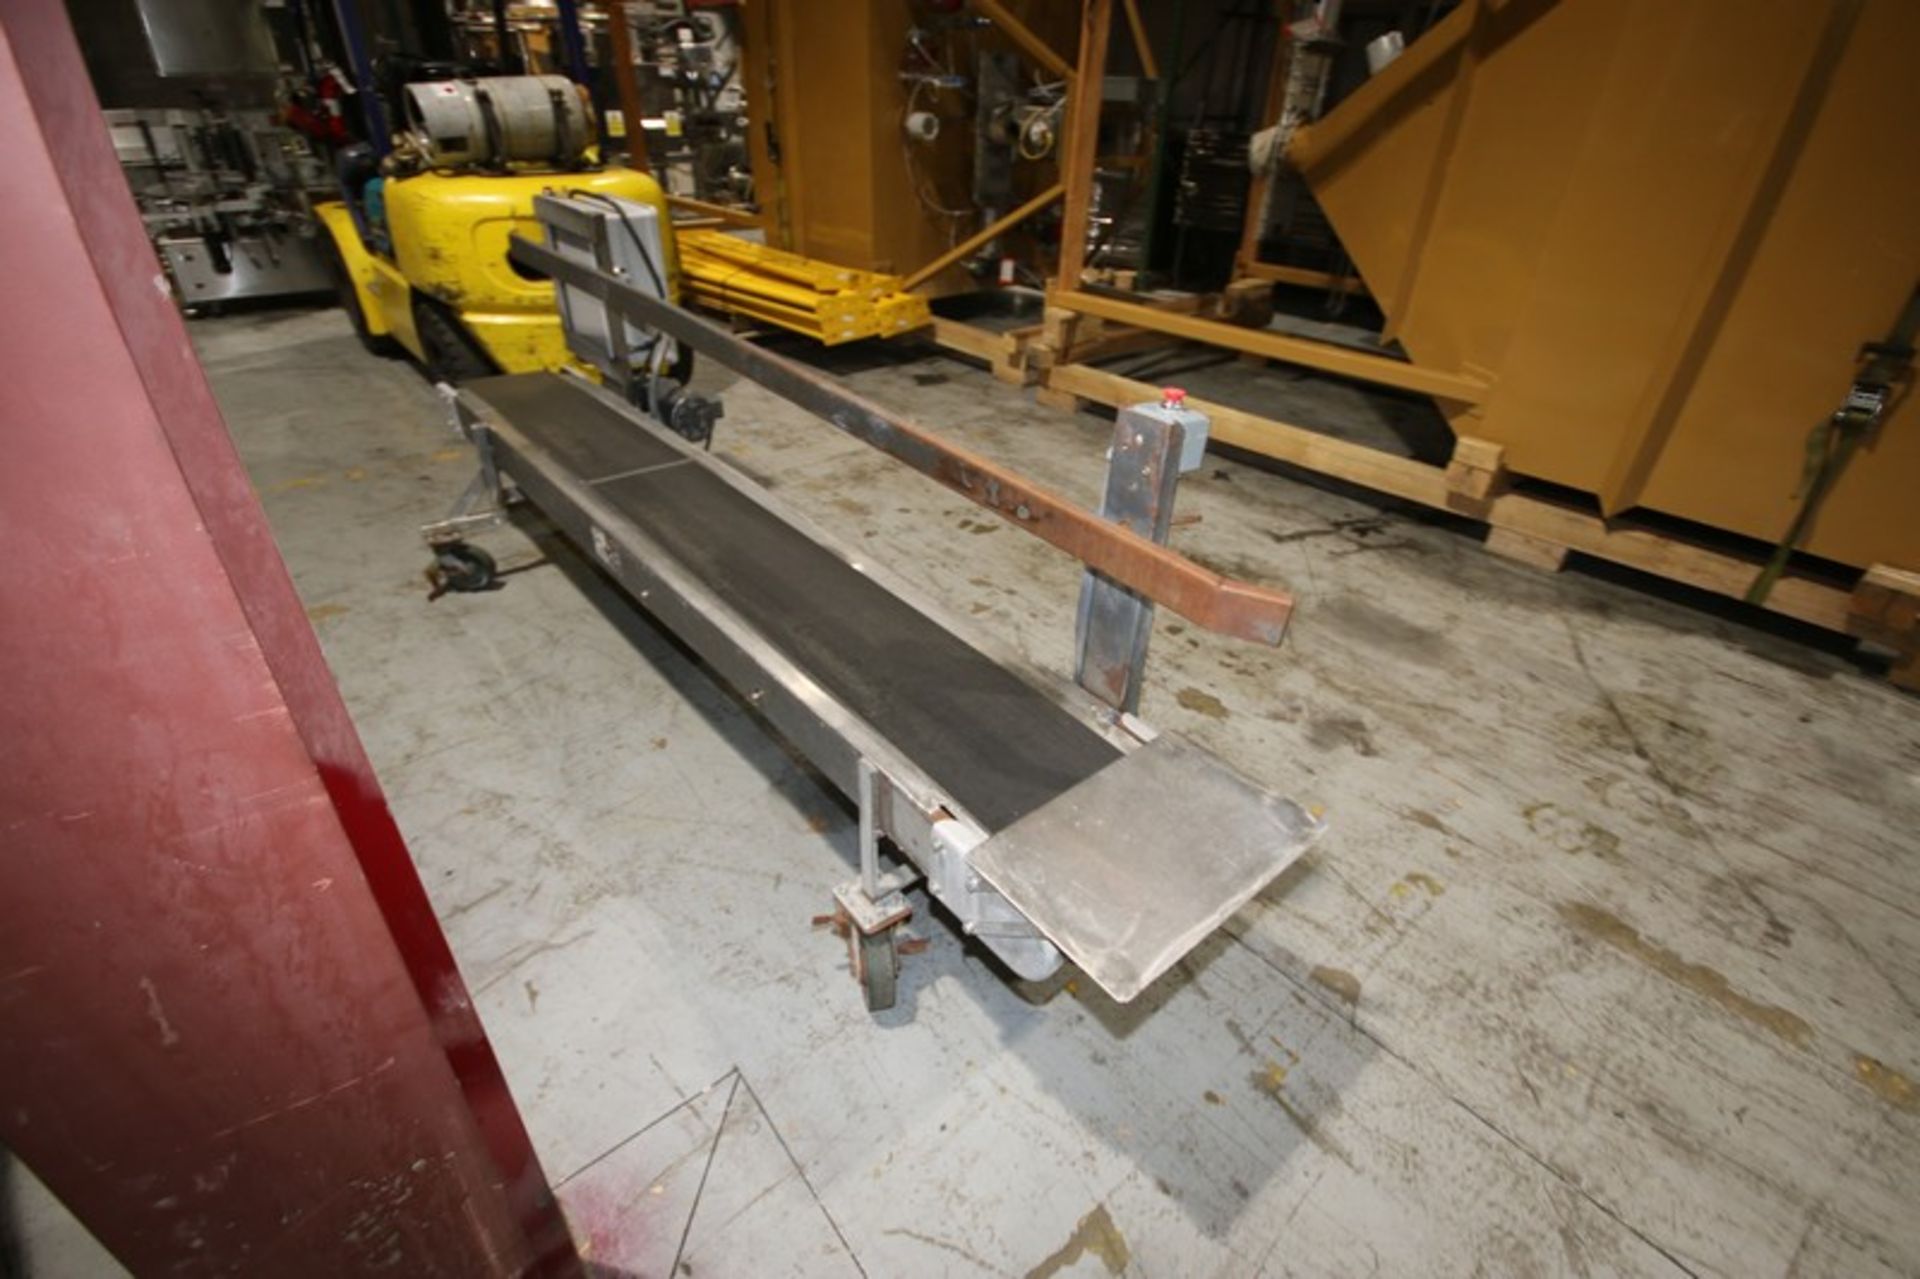 Chantland S/S Portable Power Belt Conveyor, Model 4201, S/N 39282, Overall Dims.: Aprox. 125" L x - Image 3 of 6